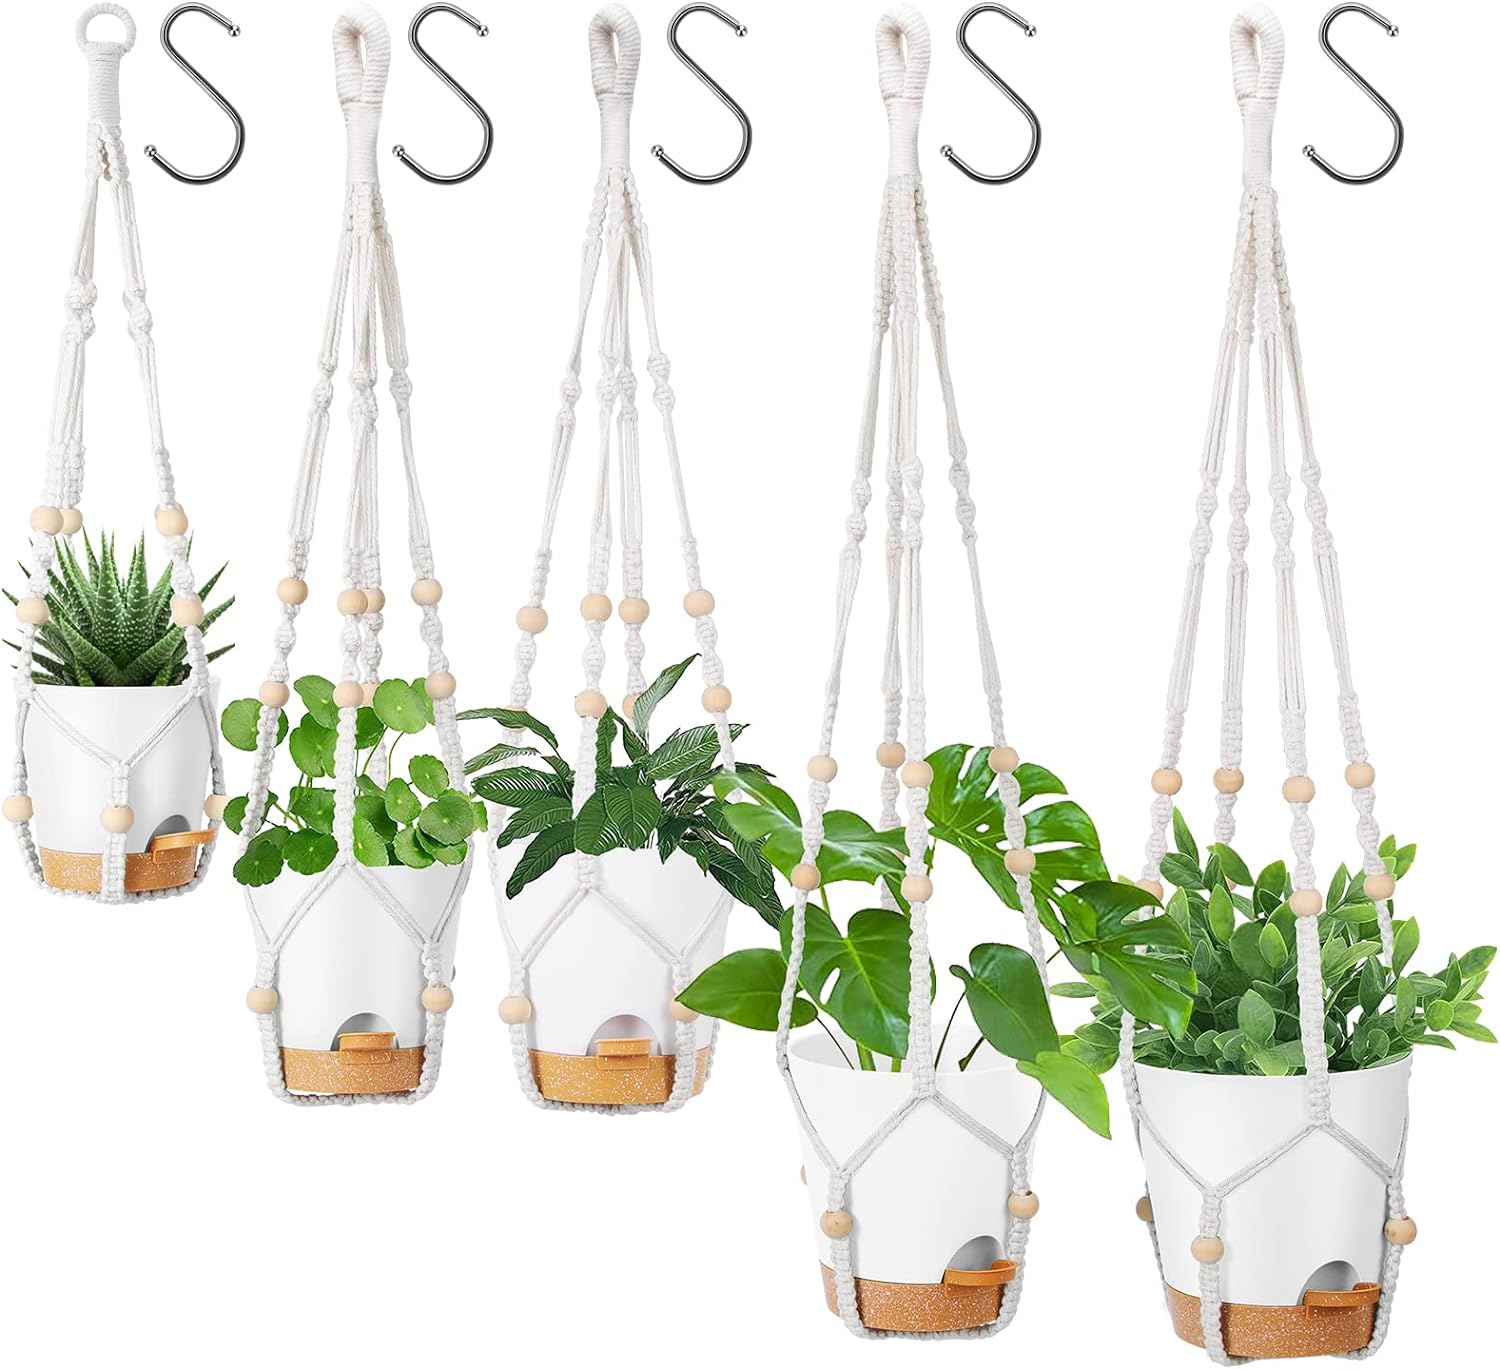 GARDIFE Hanging Planters for Indoor Plants,5Pcs Hanging Basket for Indoor Boho Home Decor,Macrame Plant Hanger,35 Inches,29Inch,23Inch, Ivory,Self Watering Planters, 7/6.5/6/5.5/5 Inch,White&White